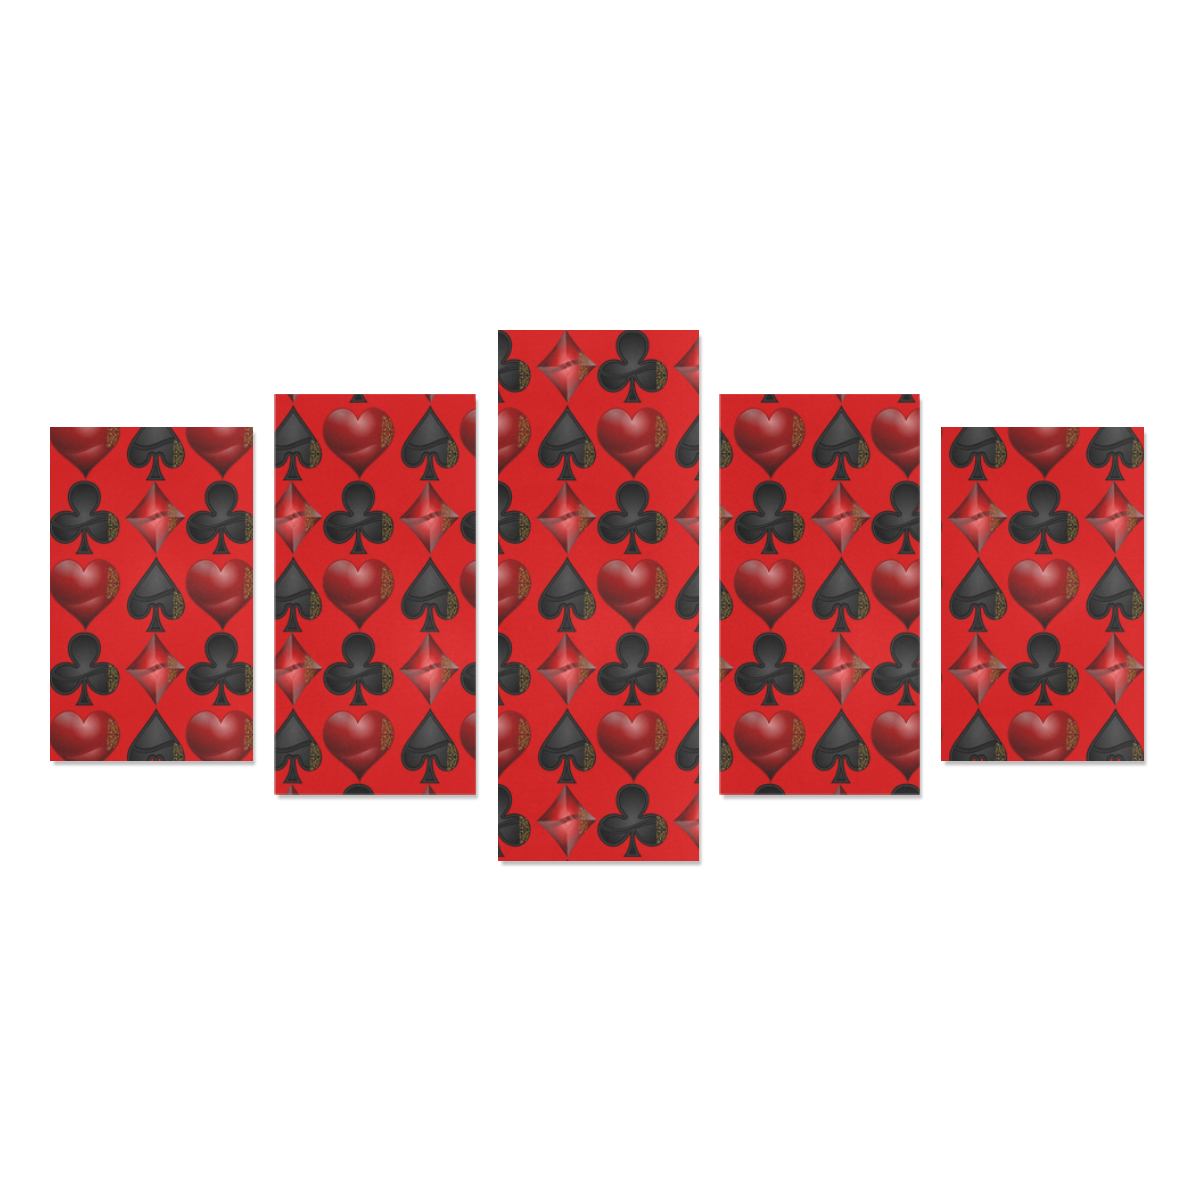 Las Vegas Black and Red Casino Poker Card Shapes on Red Canvas Print Sets C (No Frame)